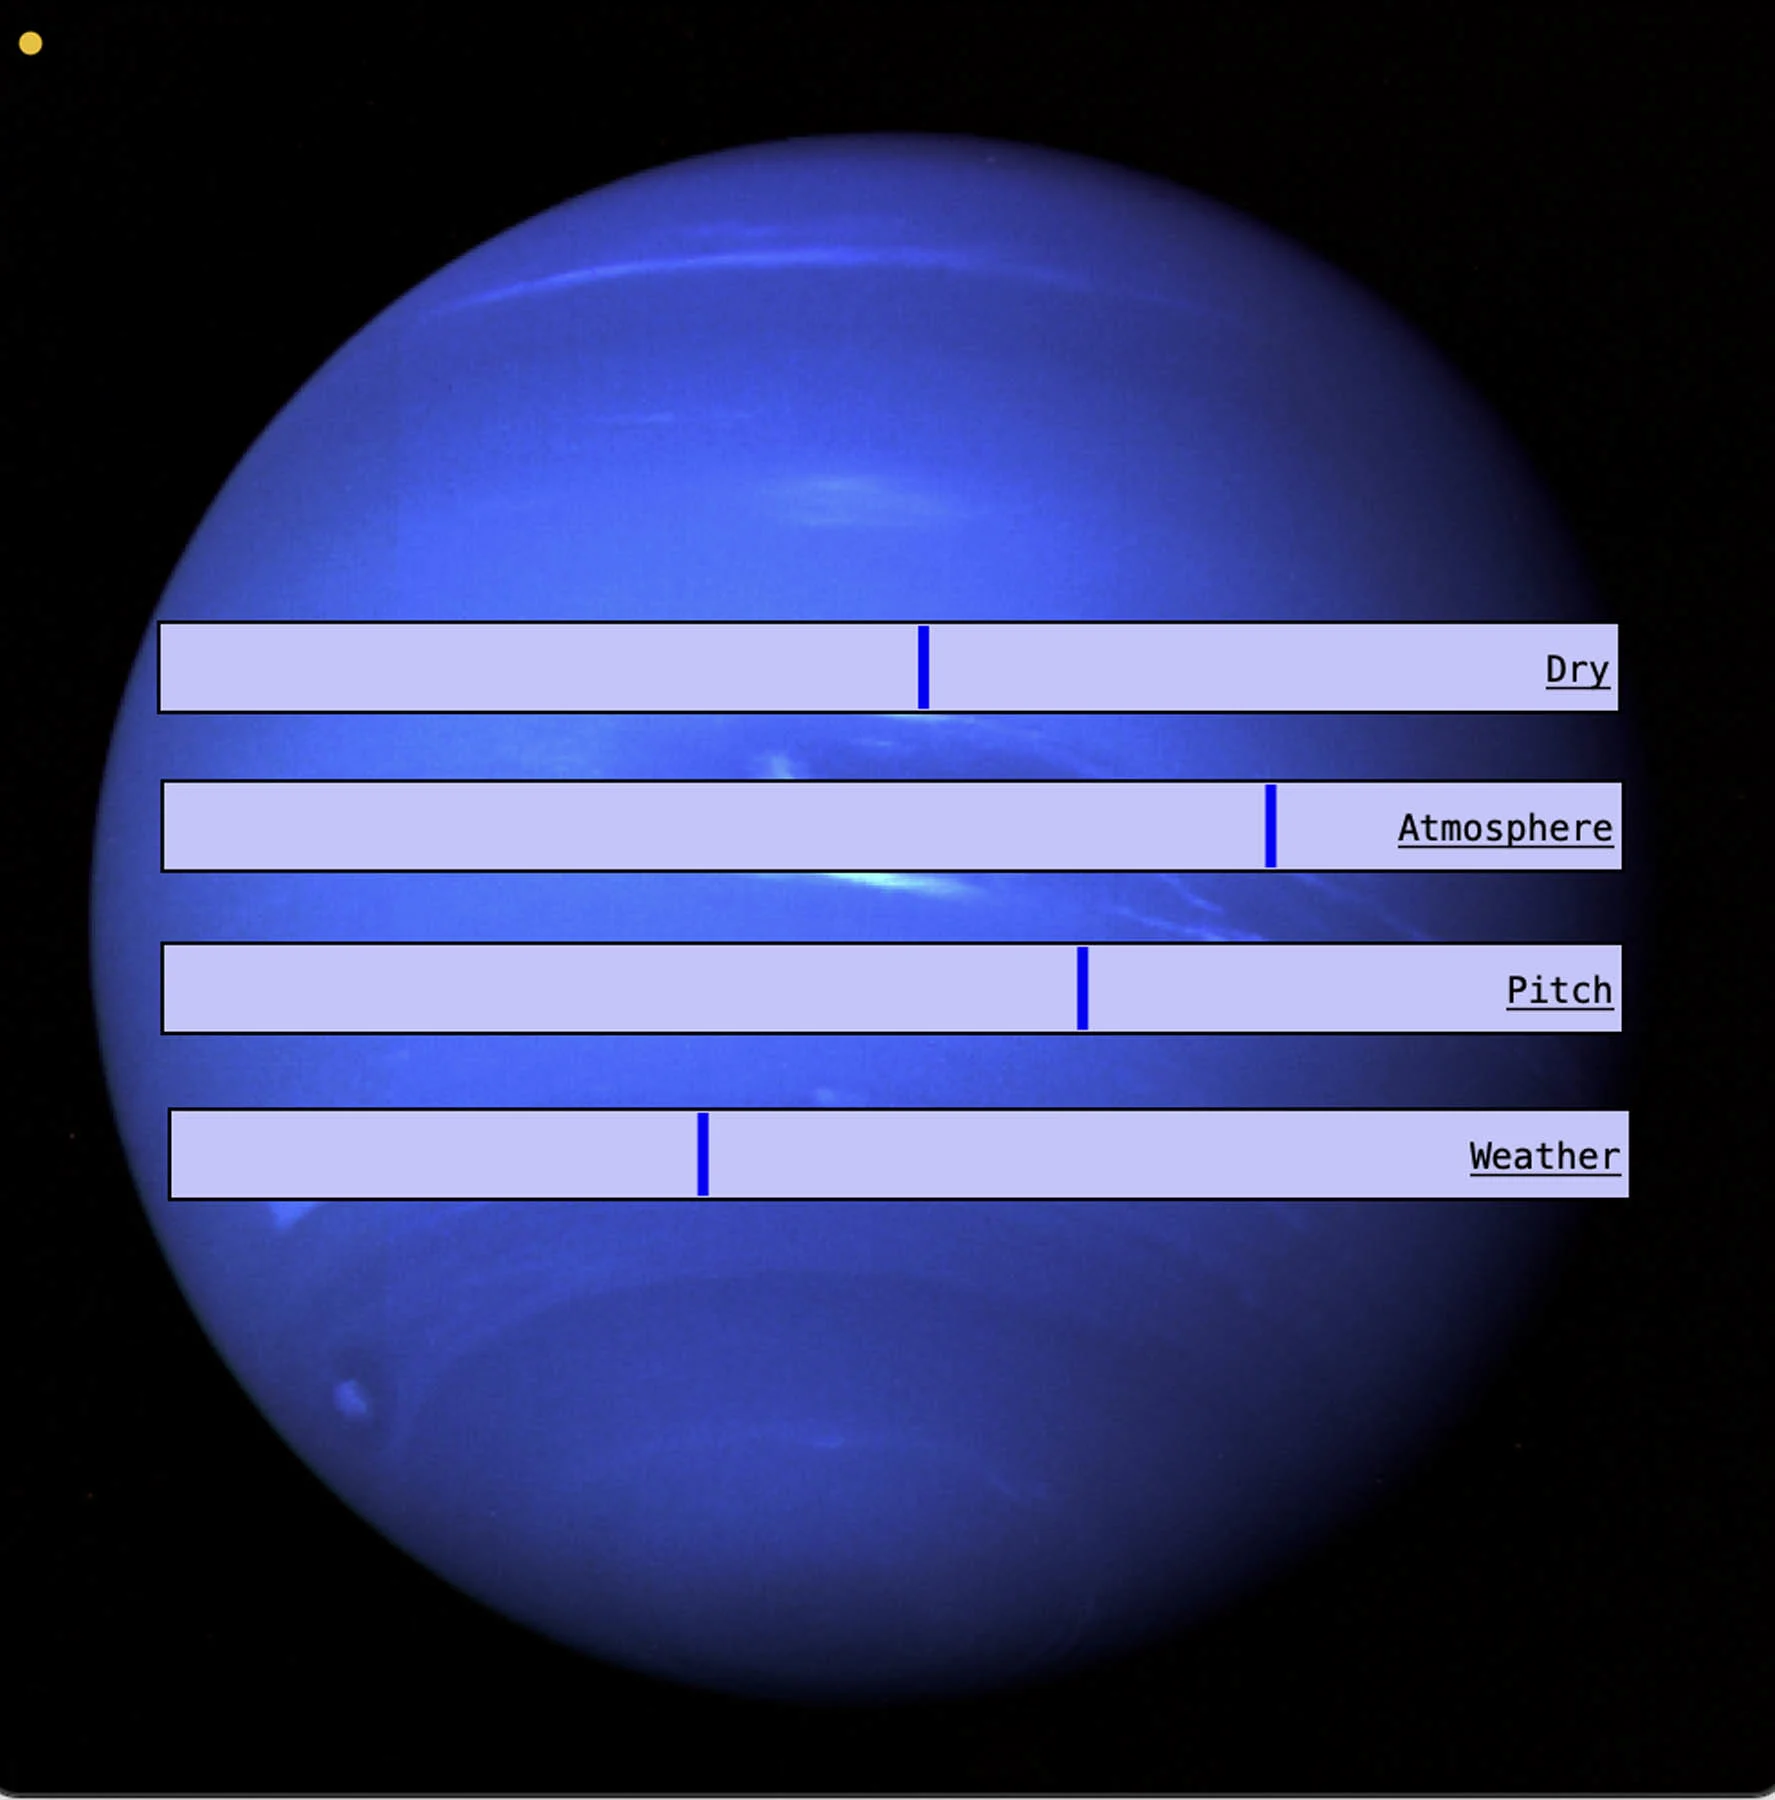 A screenshot of the Neptune VST plug-in. The plug-in is made up of a photo of Neptune. There are four long lilac rectangles overlaid in the centre of the photograph, with a word in each one: Dry, Atmosphere, Pitch, Weather.